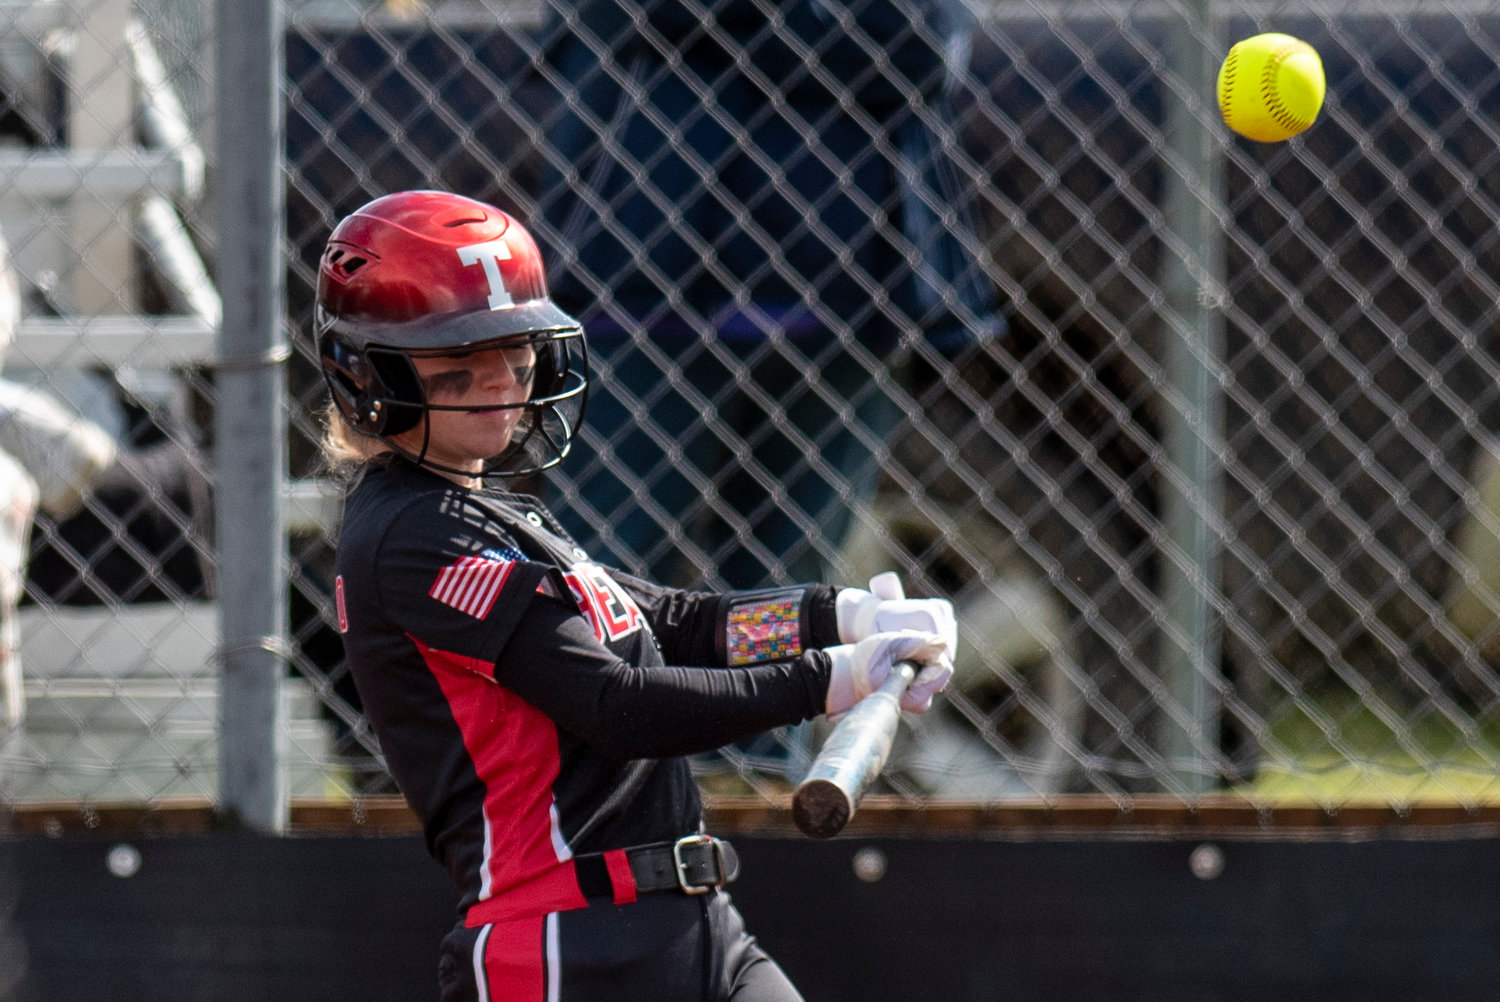 Tenino's Grace Vestal connects on an Elma pitch during a home game on April 26.